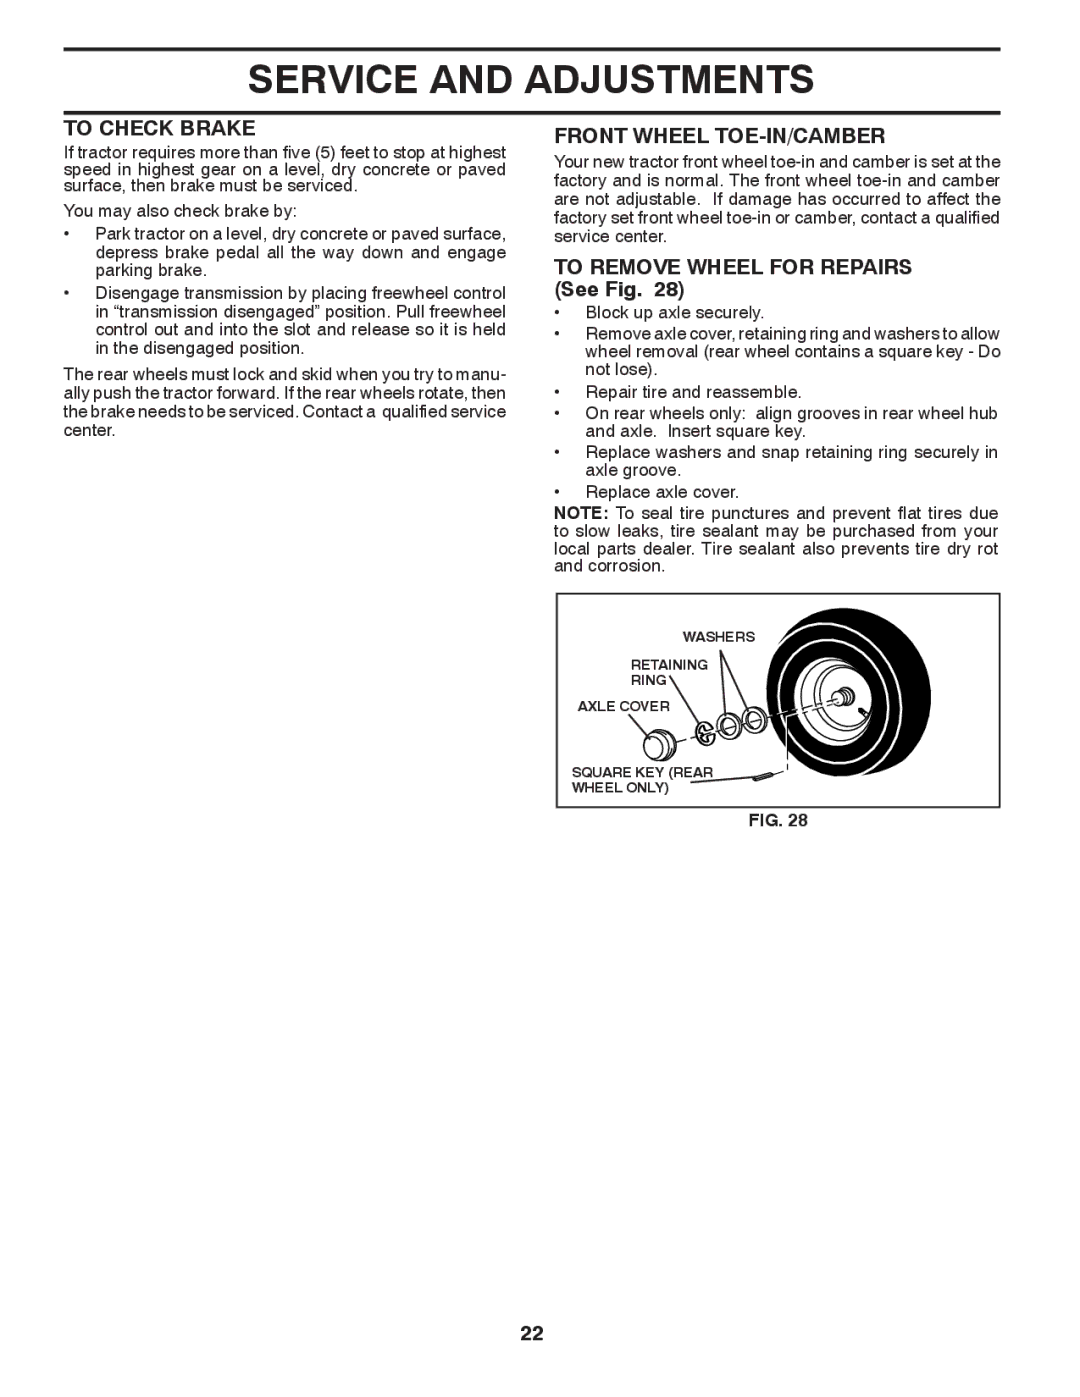 Husqvarna YTH2546 owner manual To Check Brake, Front Wheel TOE-IN/CAMBER, To Remove Wheel for Repairs See Fig 